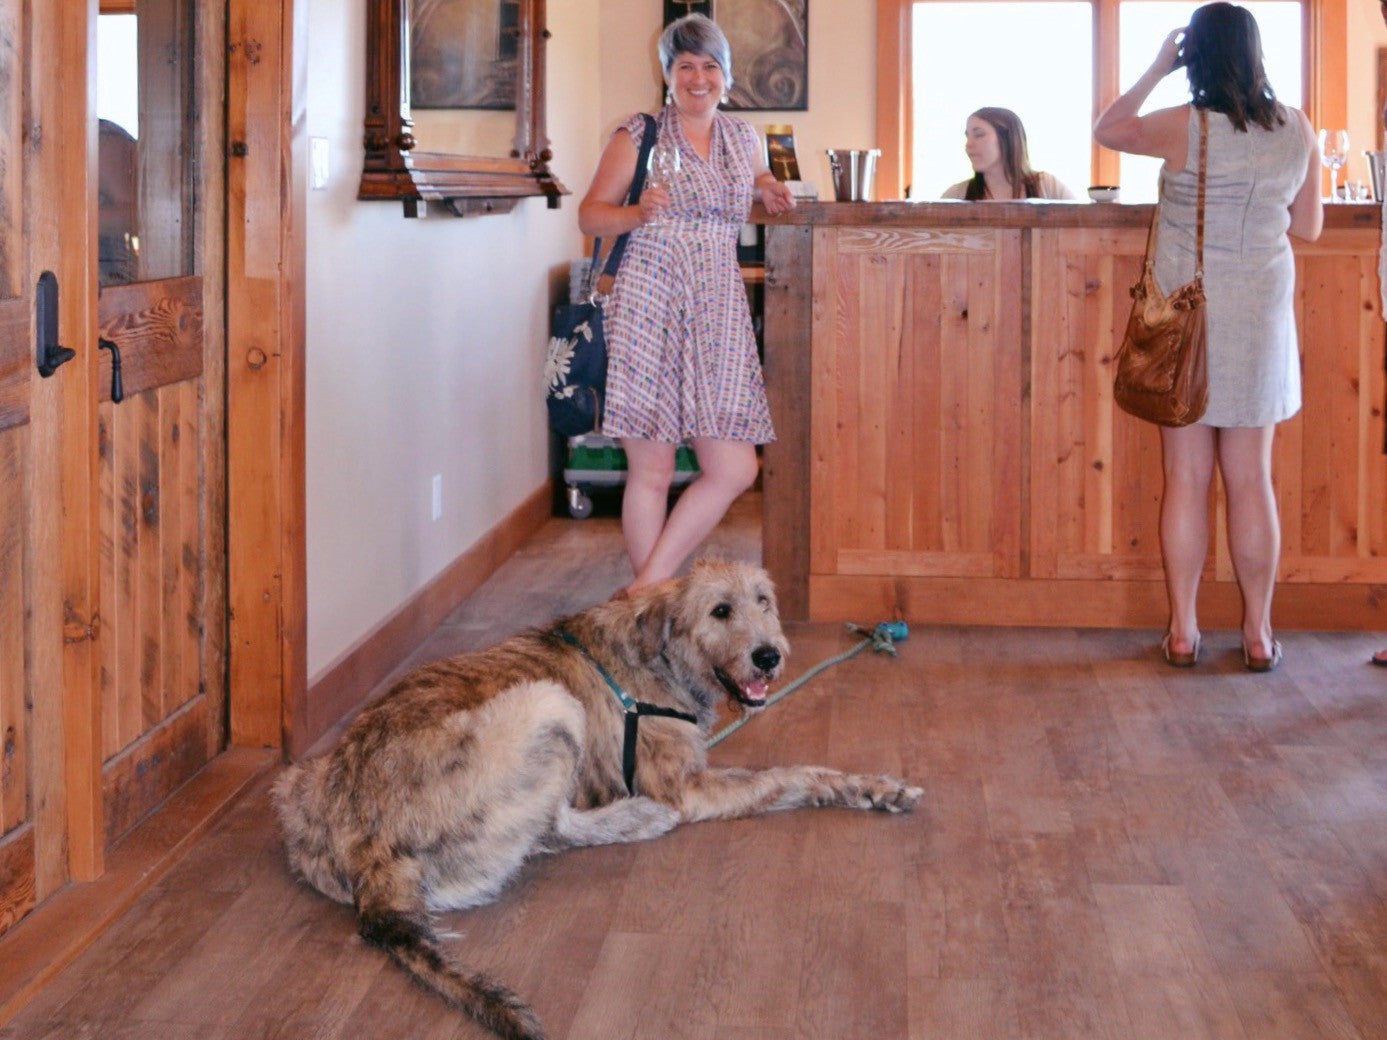 Cheers to wine tasting with your hound!